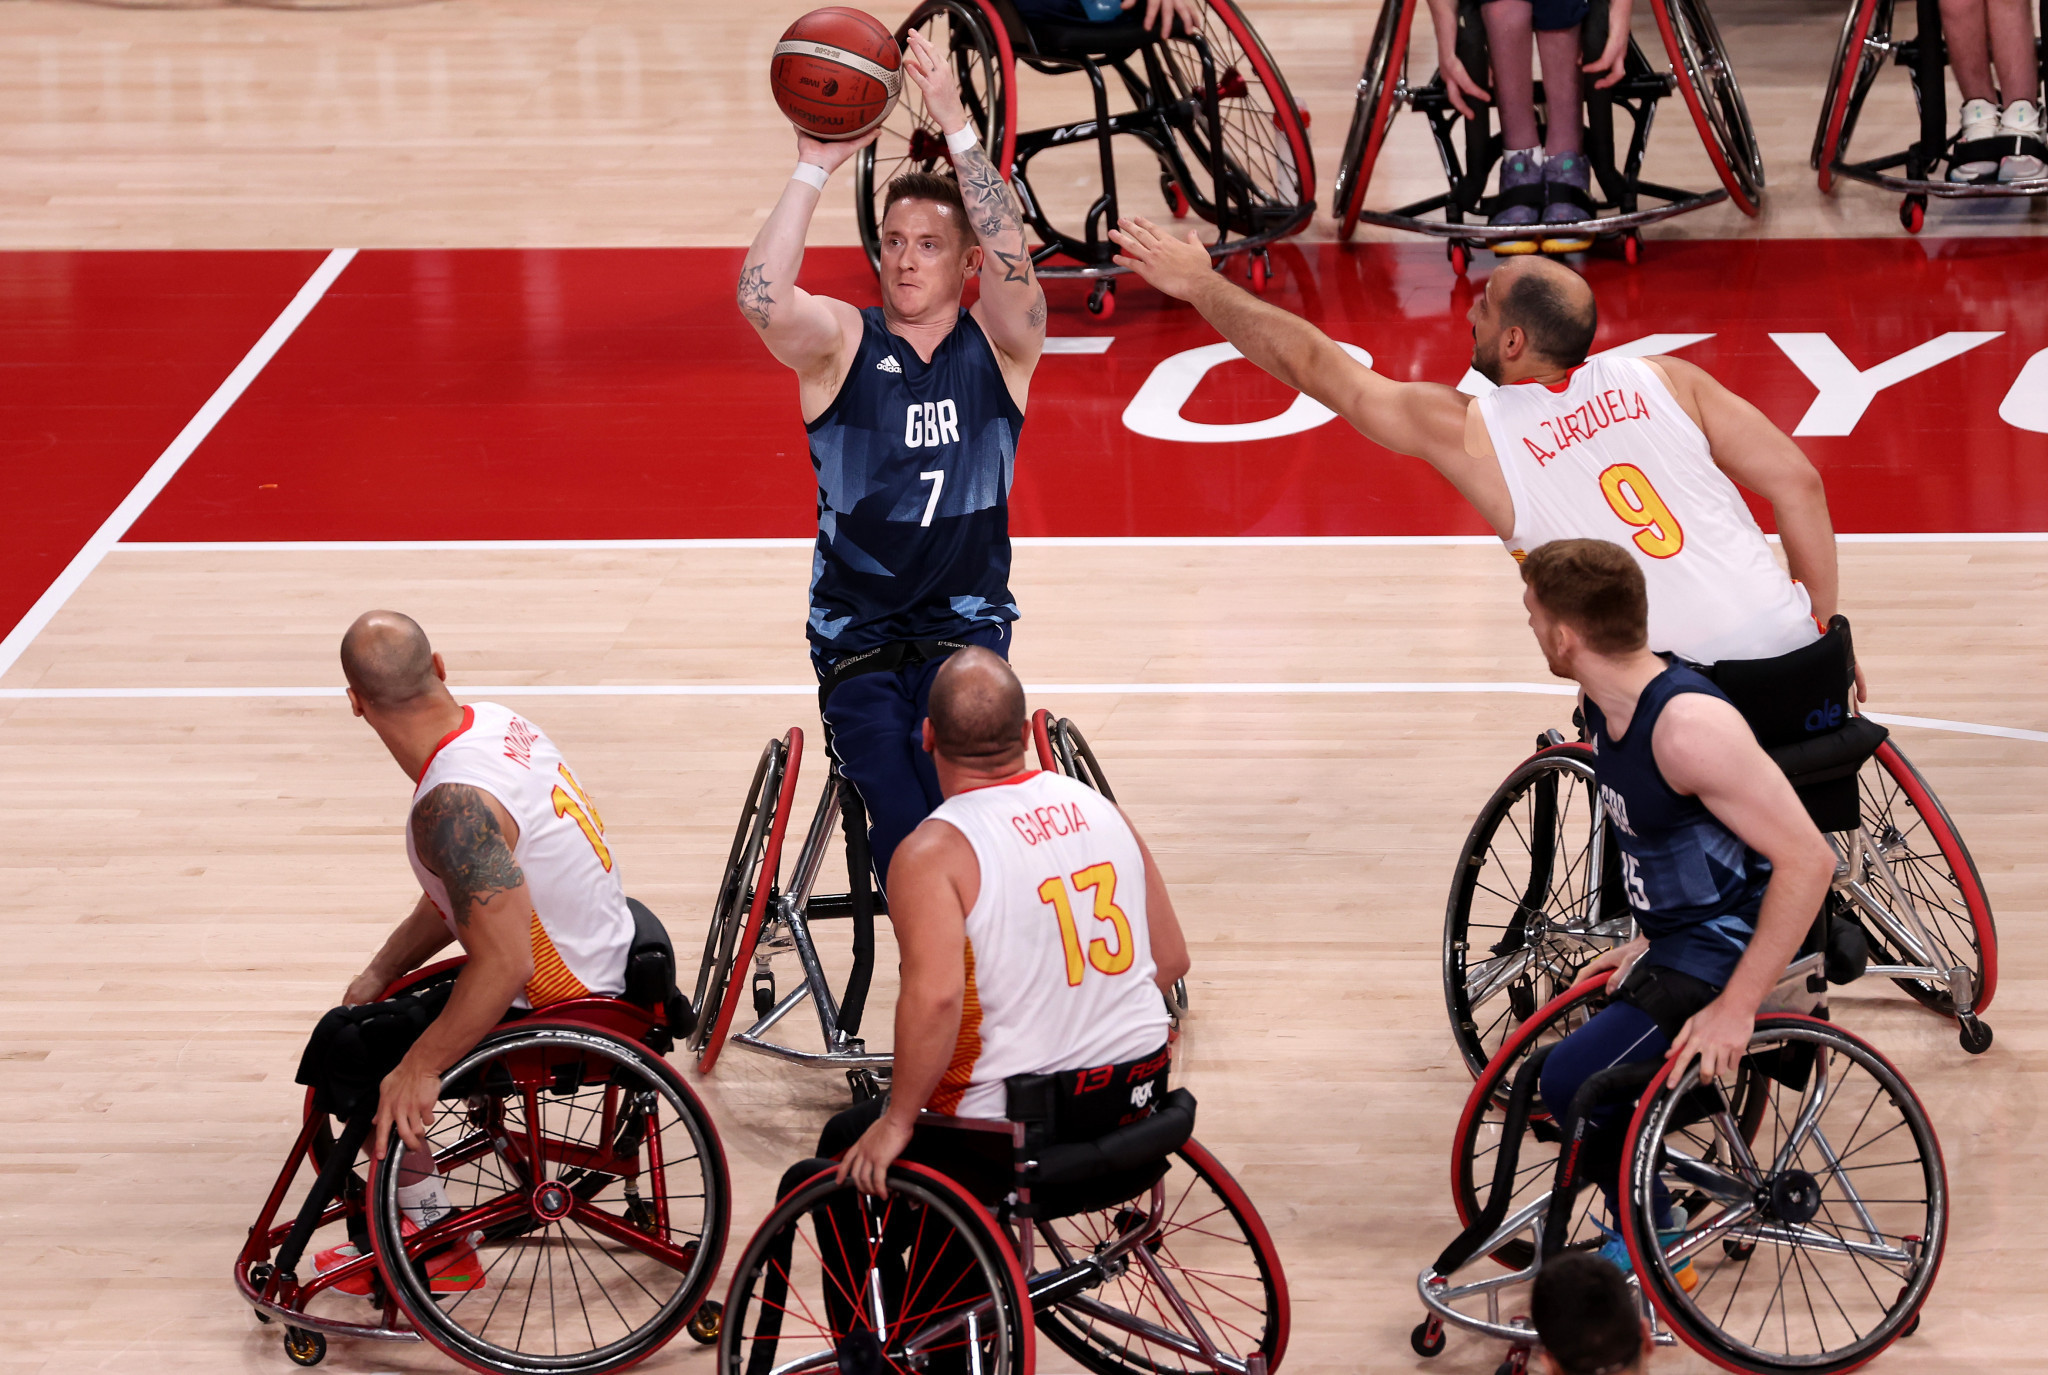 Terry Bywater, pictured with the ball, will have a seat on the new IWBF Players' Commission ©Getty Images